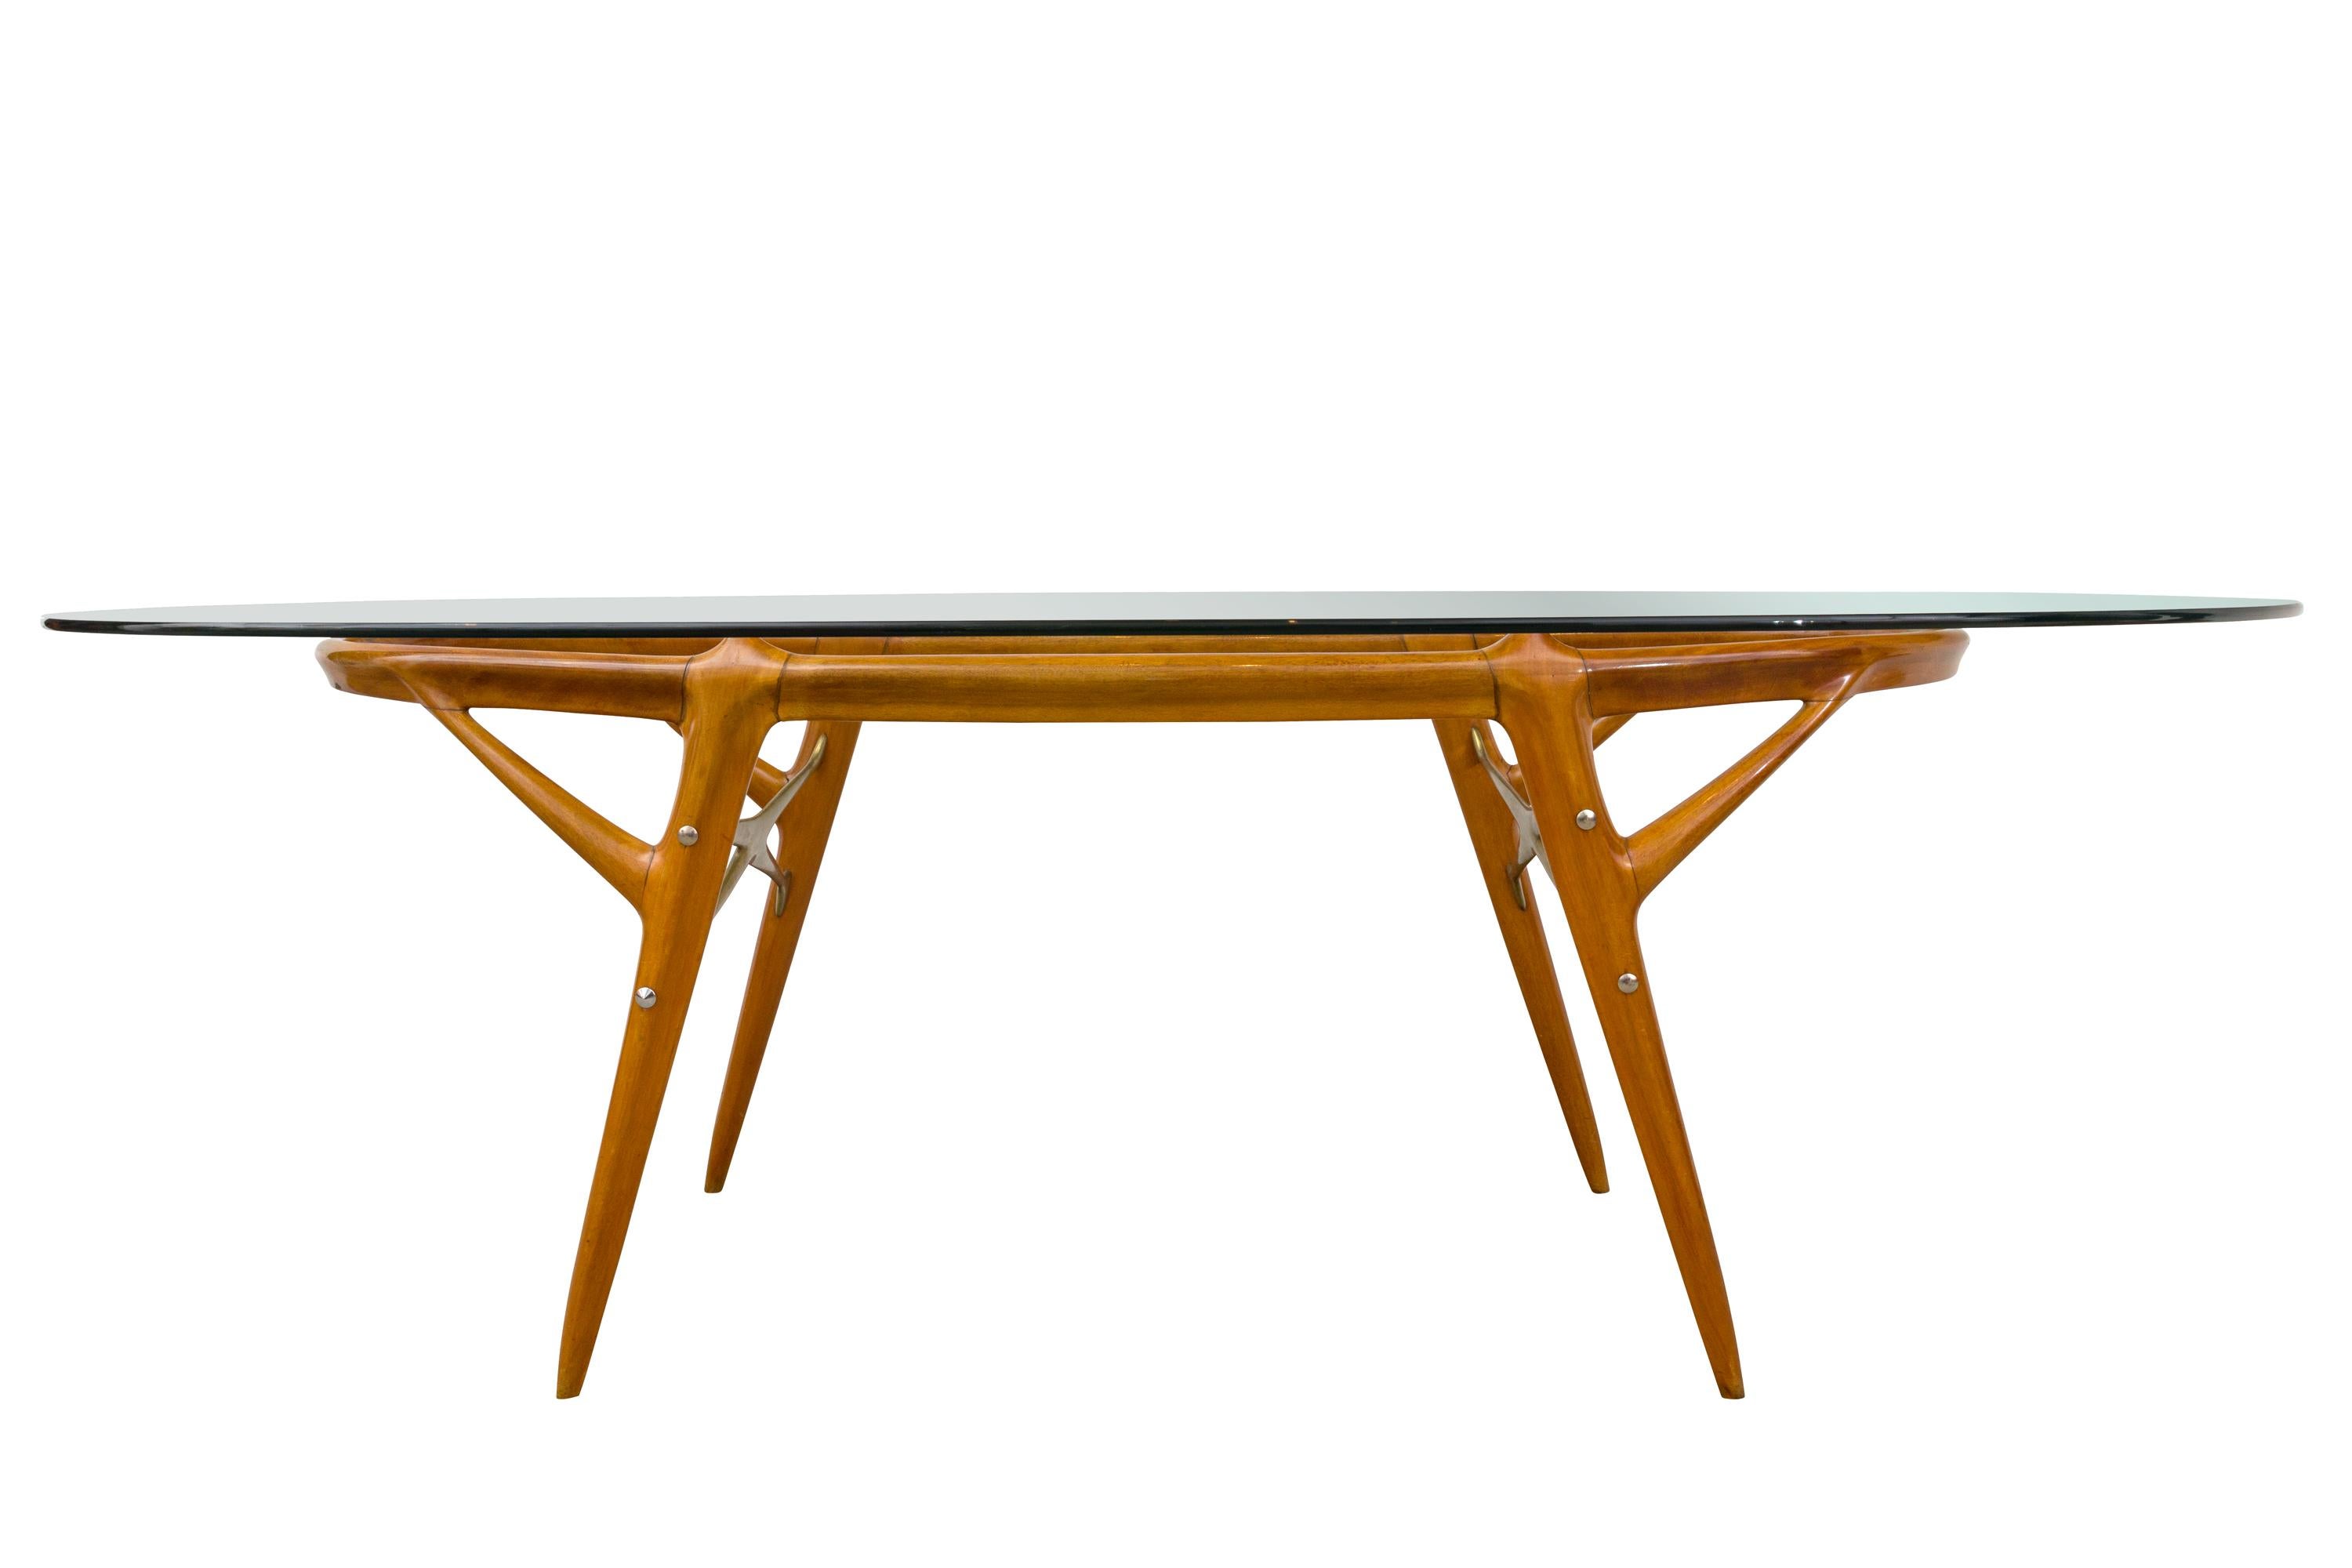 Italian Walnut and Brass Dining Table in the style of Ico Paroso, circa 1955. Ico Parisi was an Italian architect and designer born in 1916 in Palermo, Italy. He was involved in building construction and architecture in Como during his early